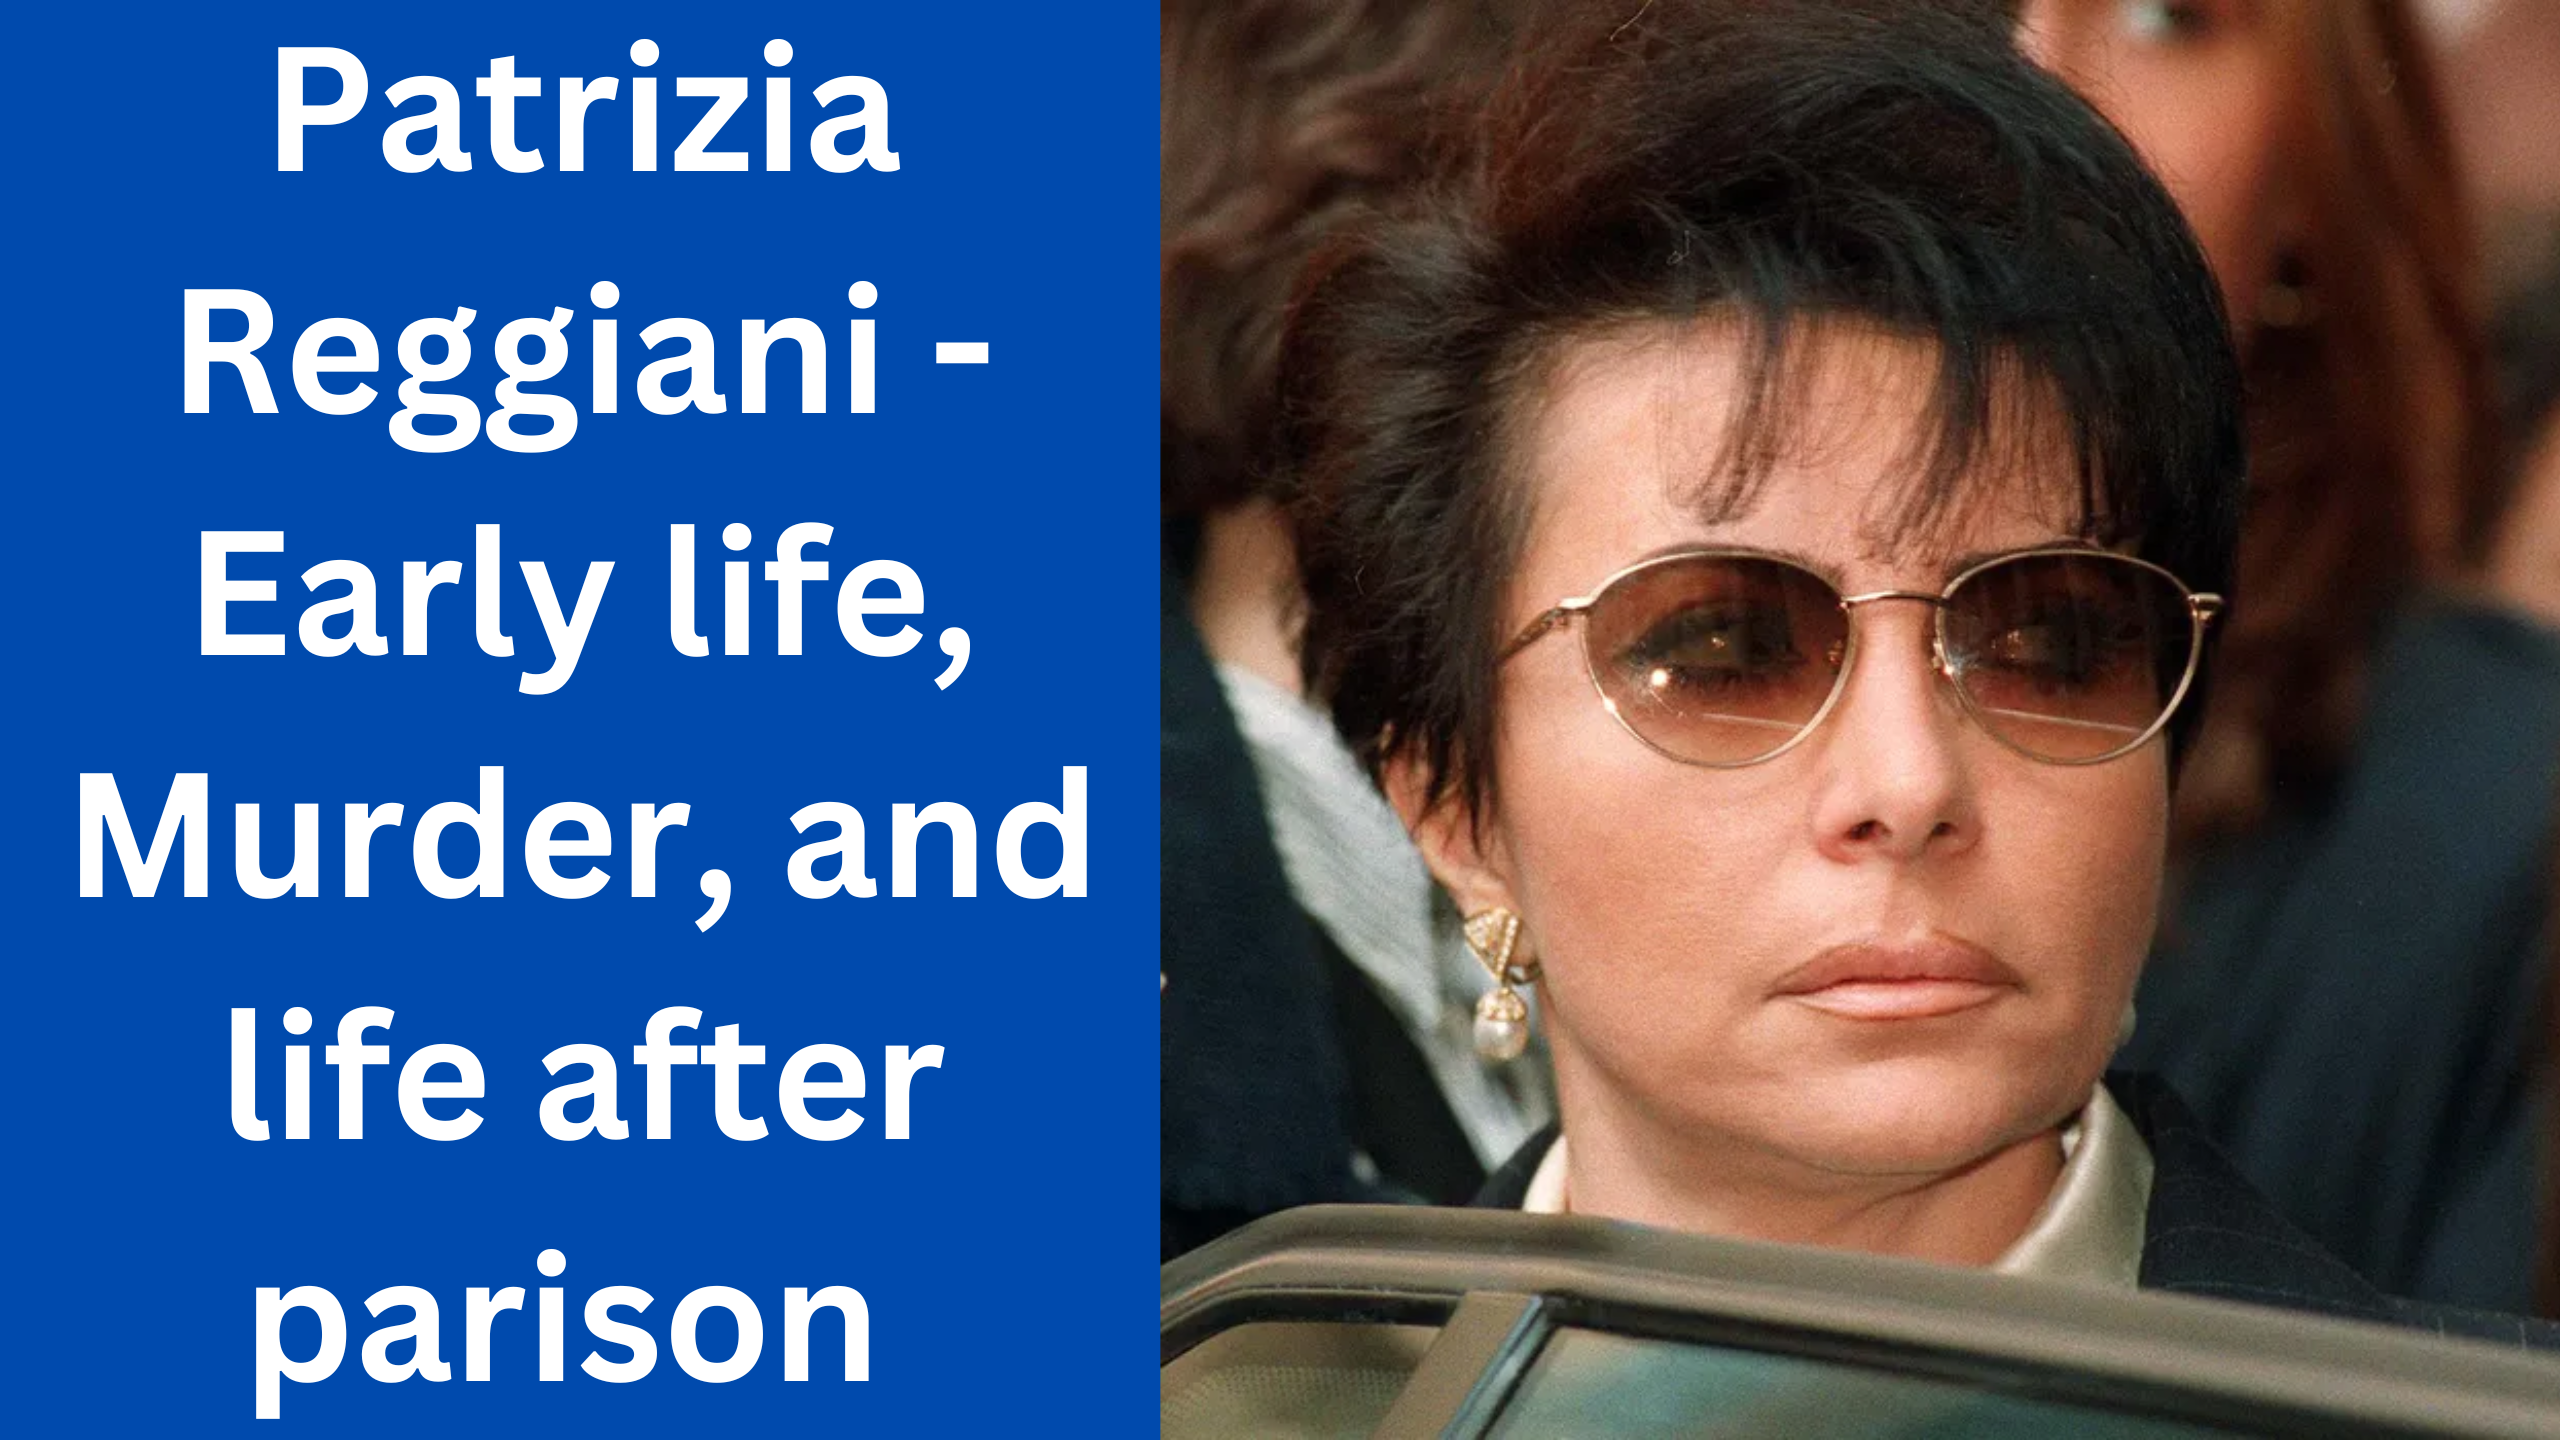 Patrizia Reggiani - The Ex-Wife of Maurizio Gucci Who Became Infamous for Murder-for-Hire 